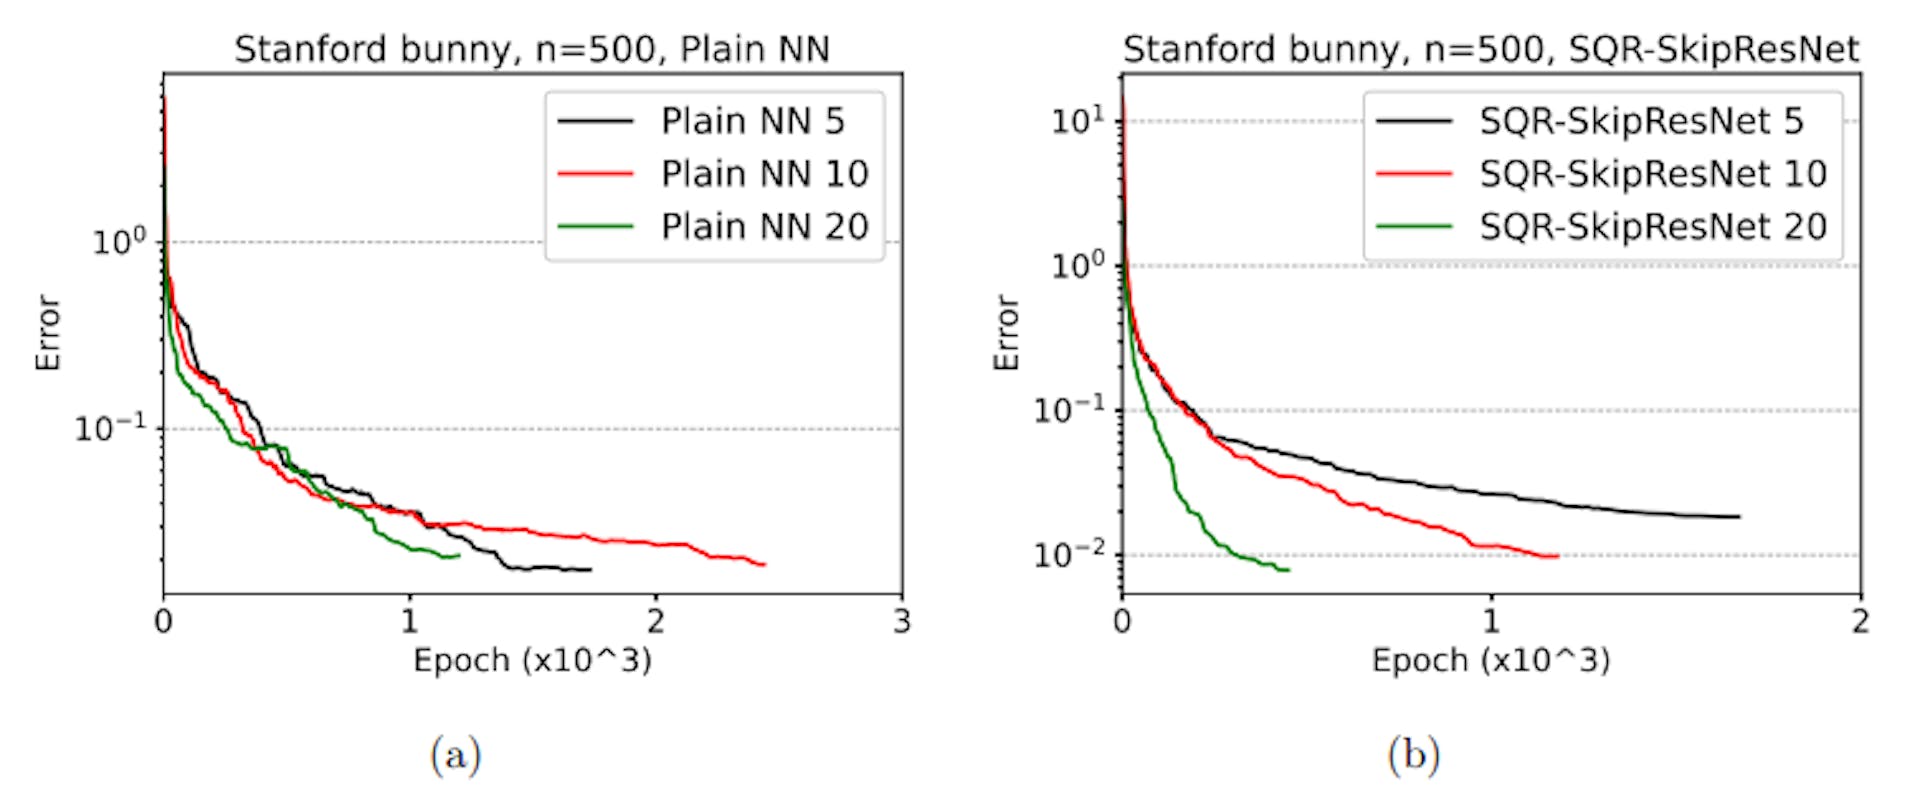 Figure 12: Example 3: Profiles of the validation errors for interpolating the the Stanford bunny for different number of layers using (a) Plain NN and (b) SQR-SkipResNet.